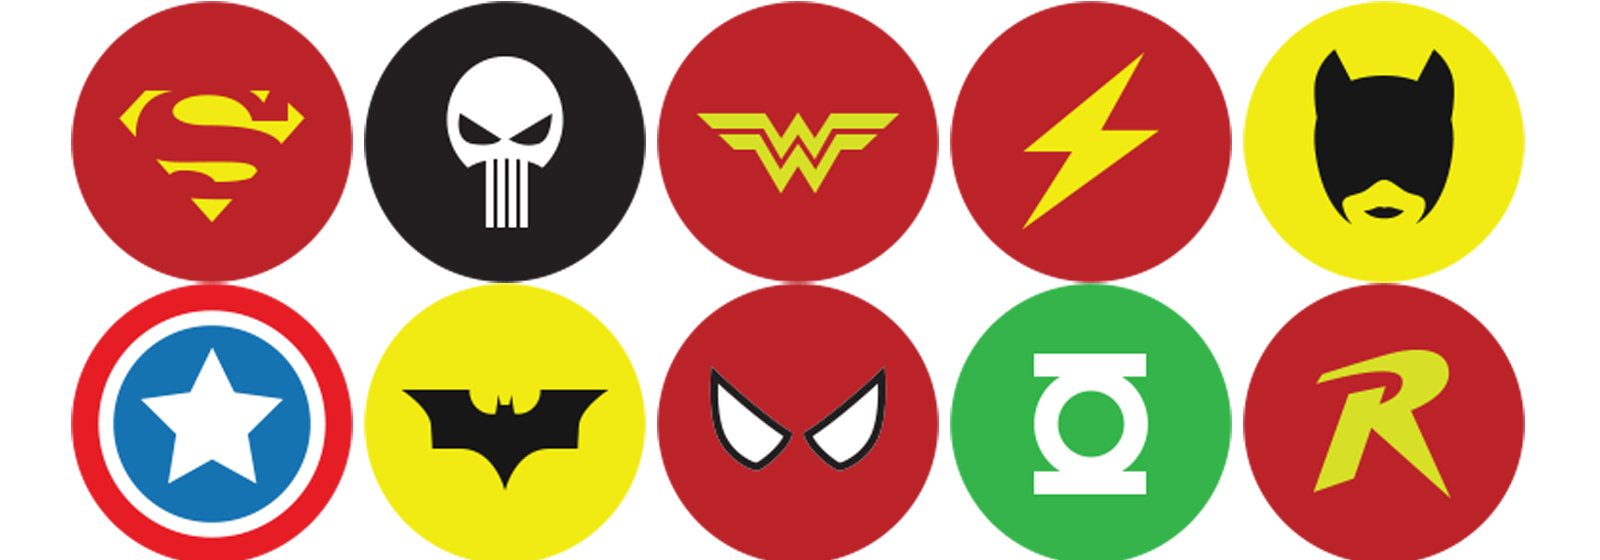 Free Superhero Logos Download Free Superhero Logos Png Images Free Cliparts On Clipart Library